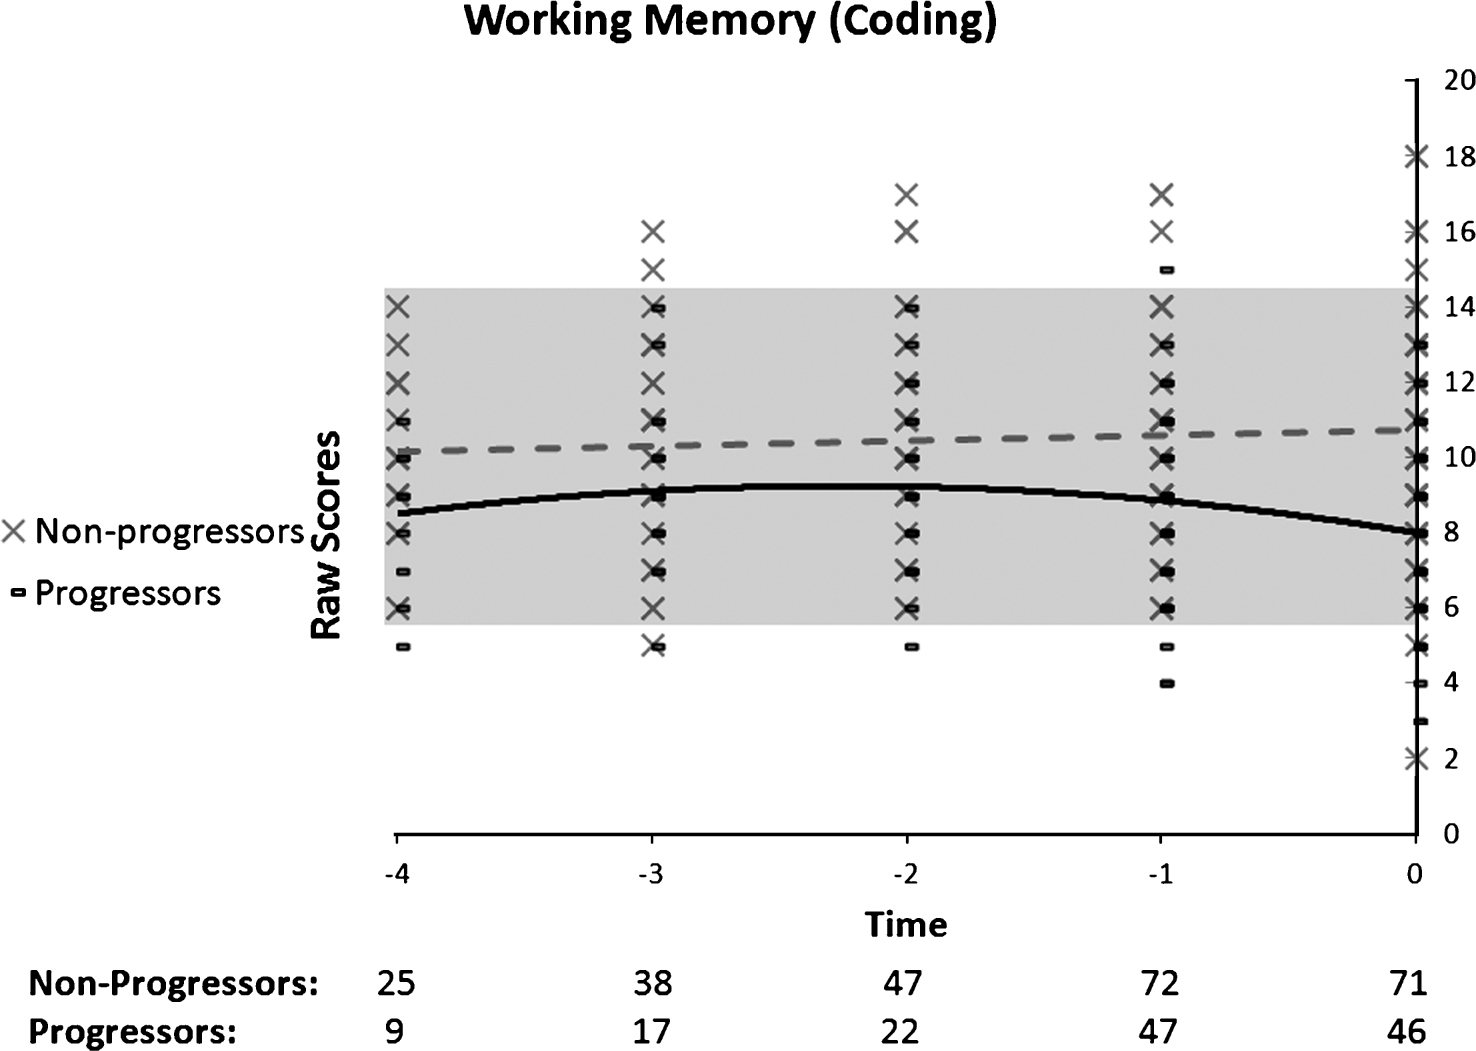 Performance on working memory (coding) as a function of time to diagnosis (for progressors) or on the last 5 cognitive assessments (for non-progressors). A quadratic function best describes the distribution for the progressors: black line. A linear function best describes the distribution for the non-progressors: dotted grey line.